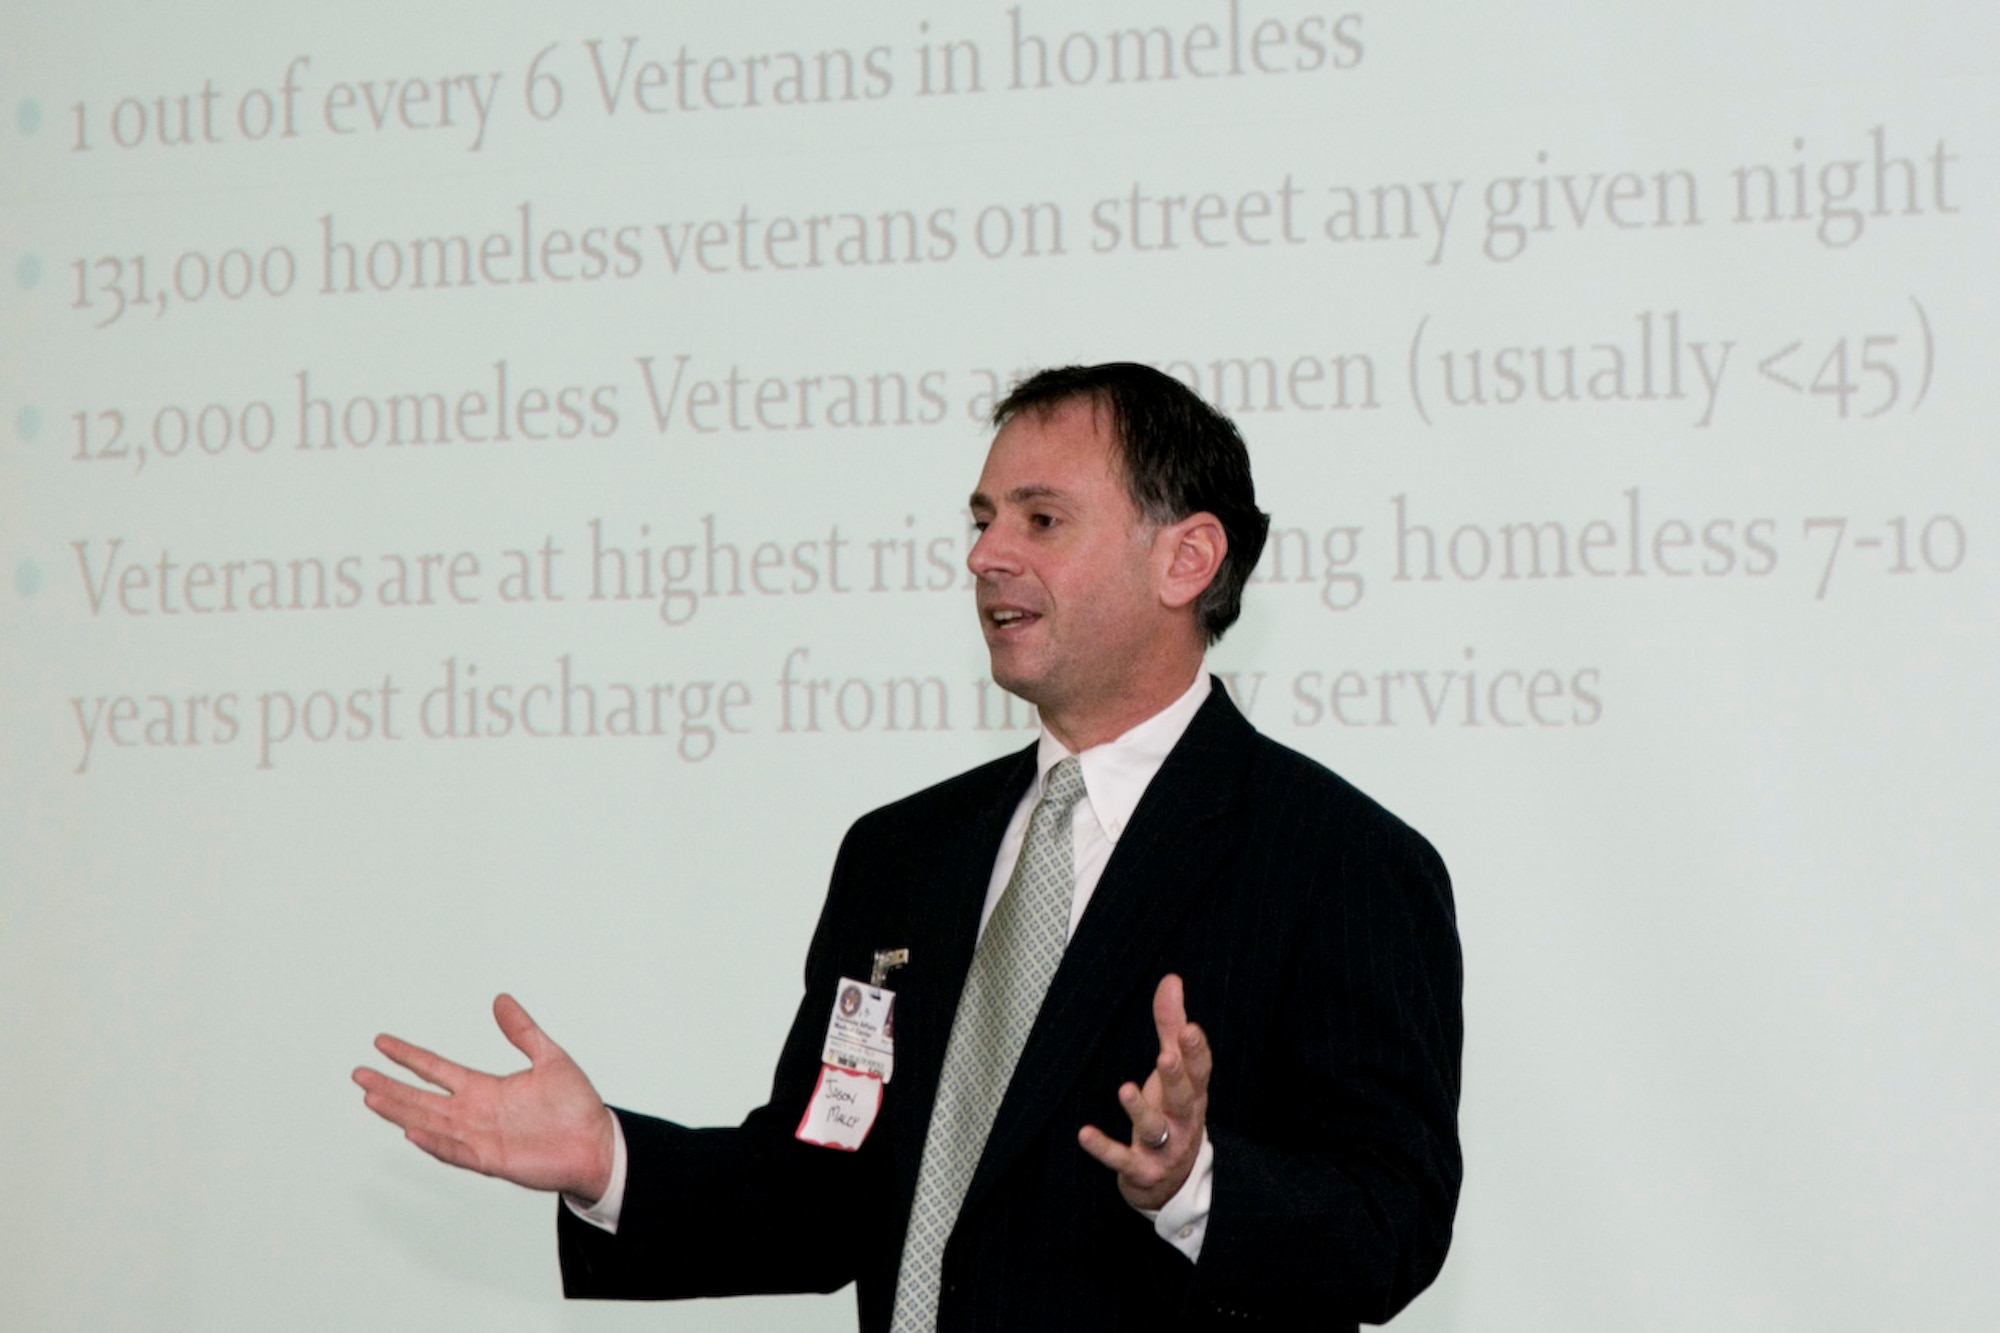 Dr. Jason Malcy, program director for the Domiciliary for Homeless Veterans  (DCHV)/GOALS program at the Veterans Administration Medical Center in Martinsburg, talks about the issue of veterans homelessness at the Inter-Service Family Assistance Committee of Eastern West Virginia’s February meeting at the 167th Airlift Wing in Martinsburg. (U.S. Air Force photo by Master Sgt. Emily Beightol-Deyerle)